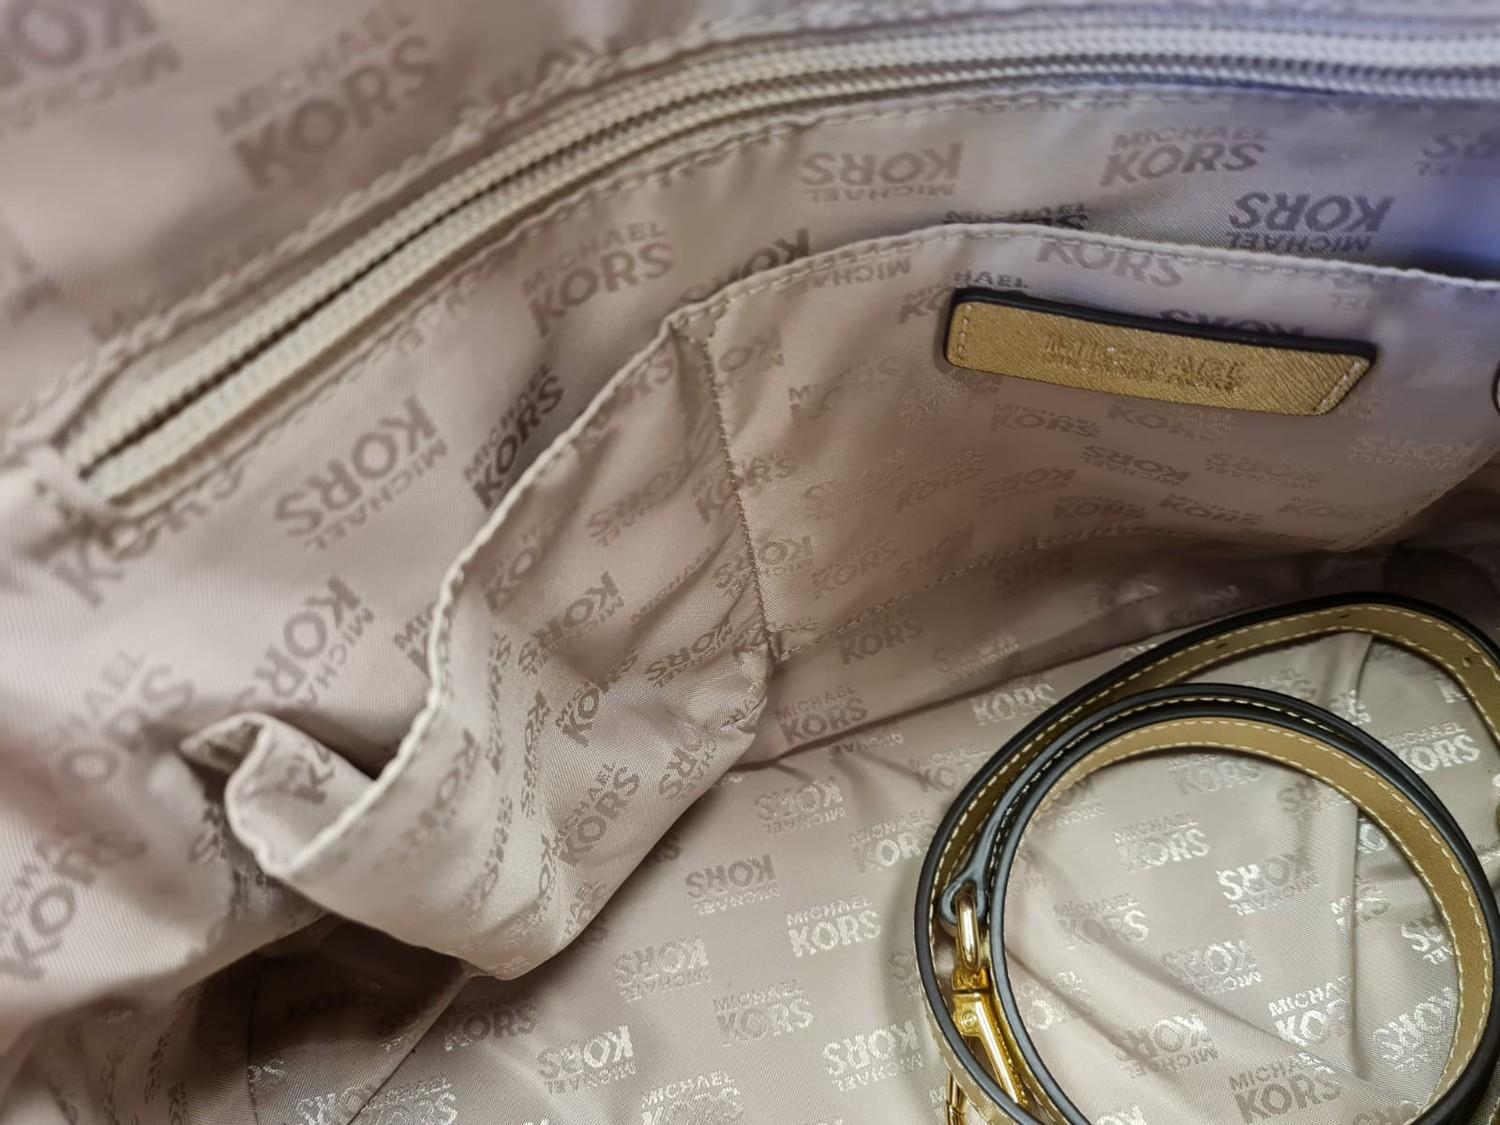 Michael Kors new and unused handbag in a subtle shade of Chantilly gold - Image 5 of 5